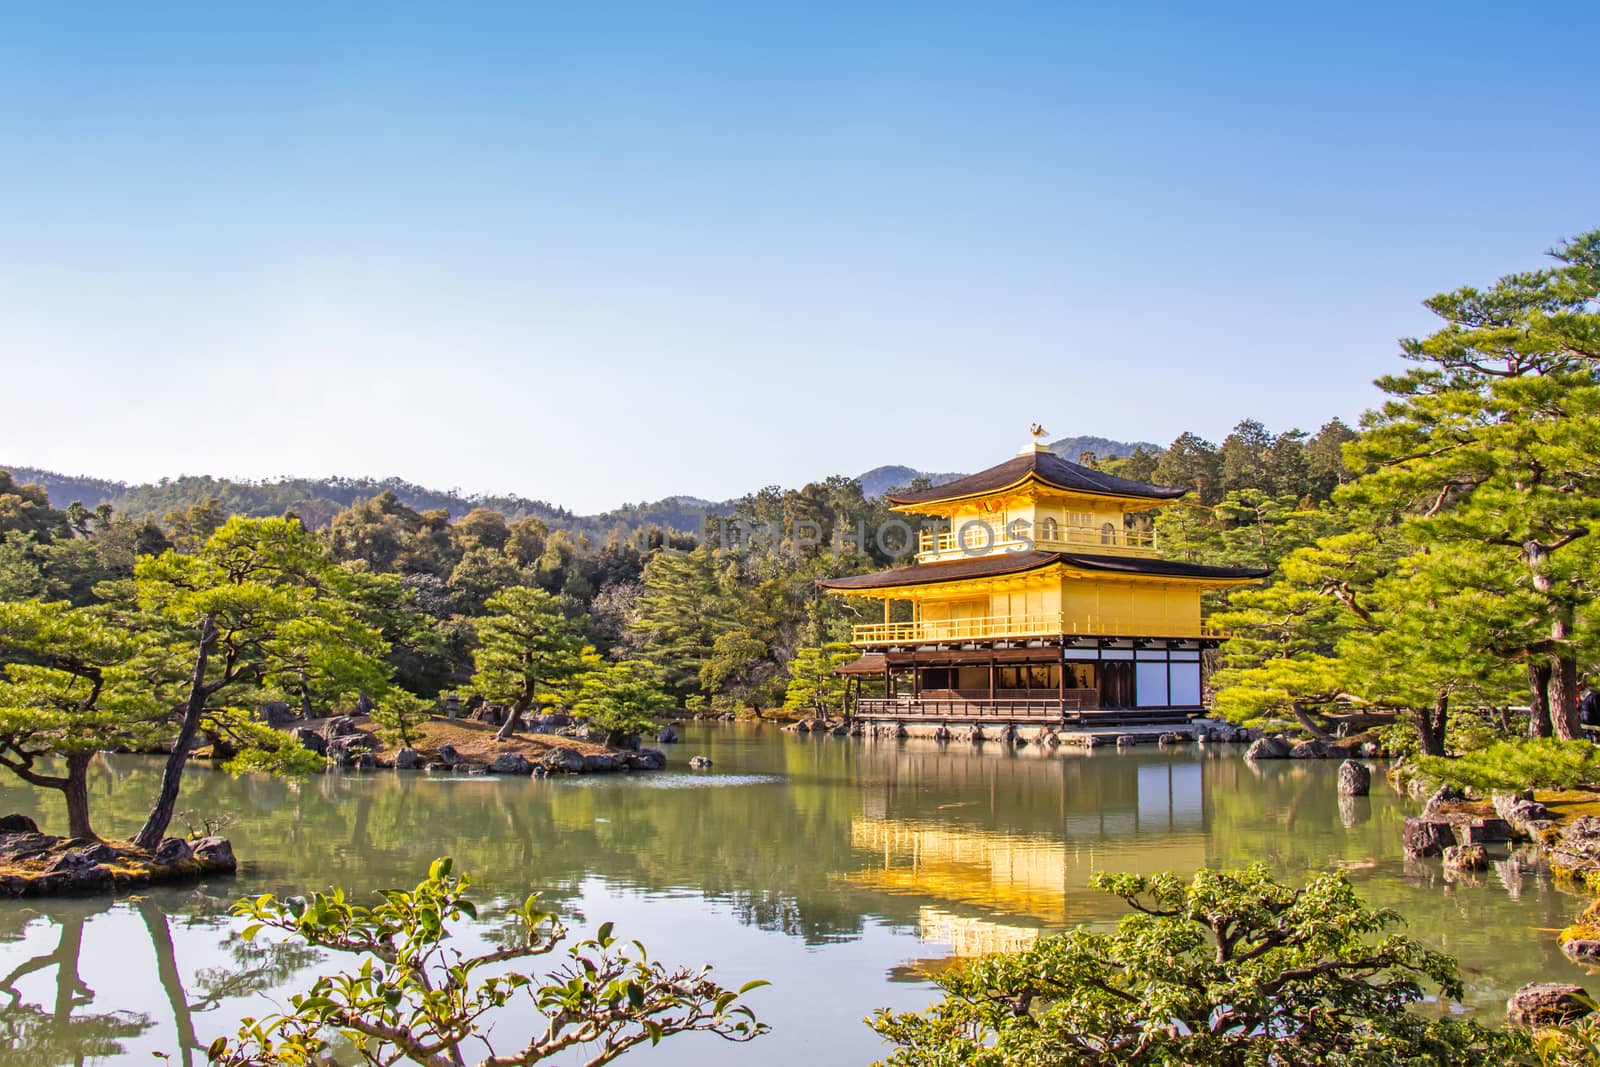 Golden Pavilion of Kinkaku-ji temple beautiful architecture, one of the most famous temple in Kyoto. Japan.